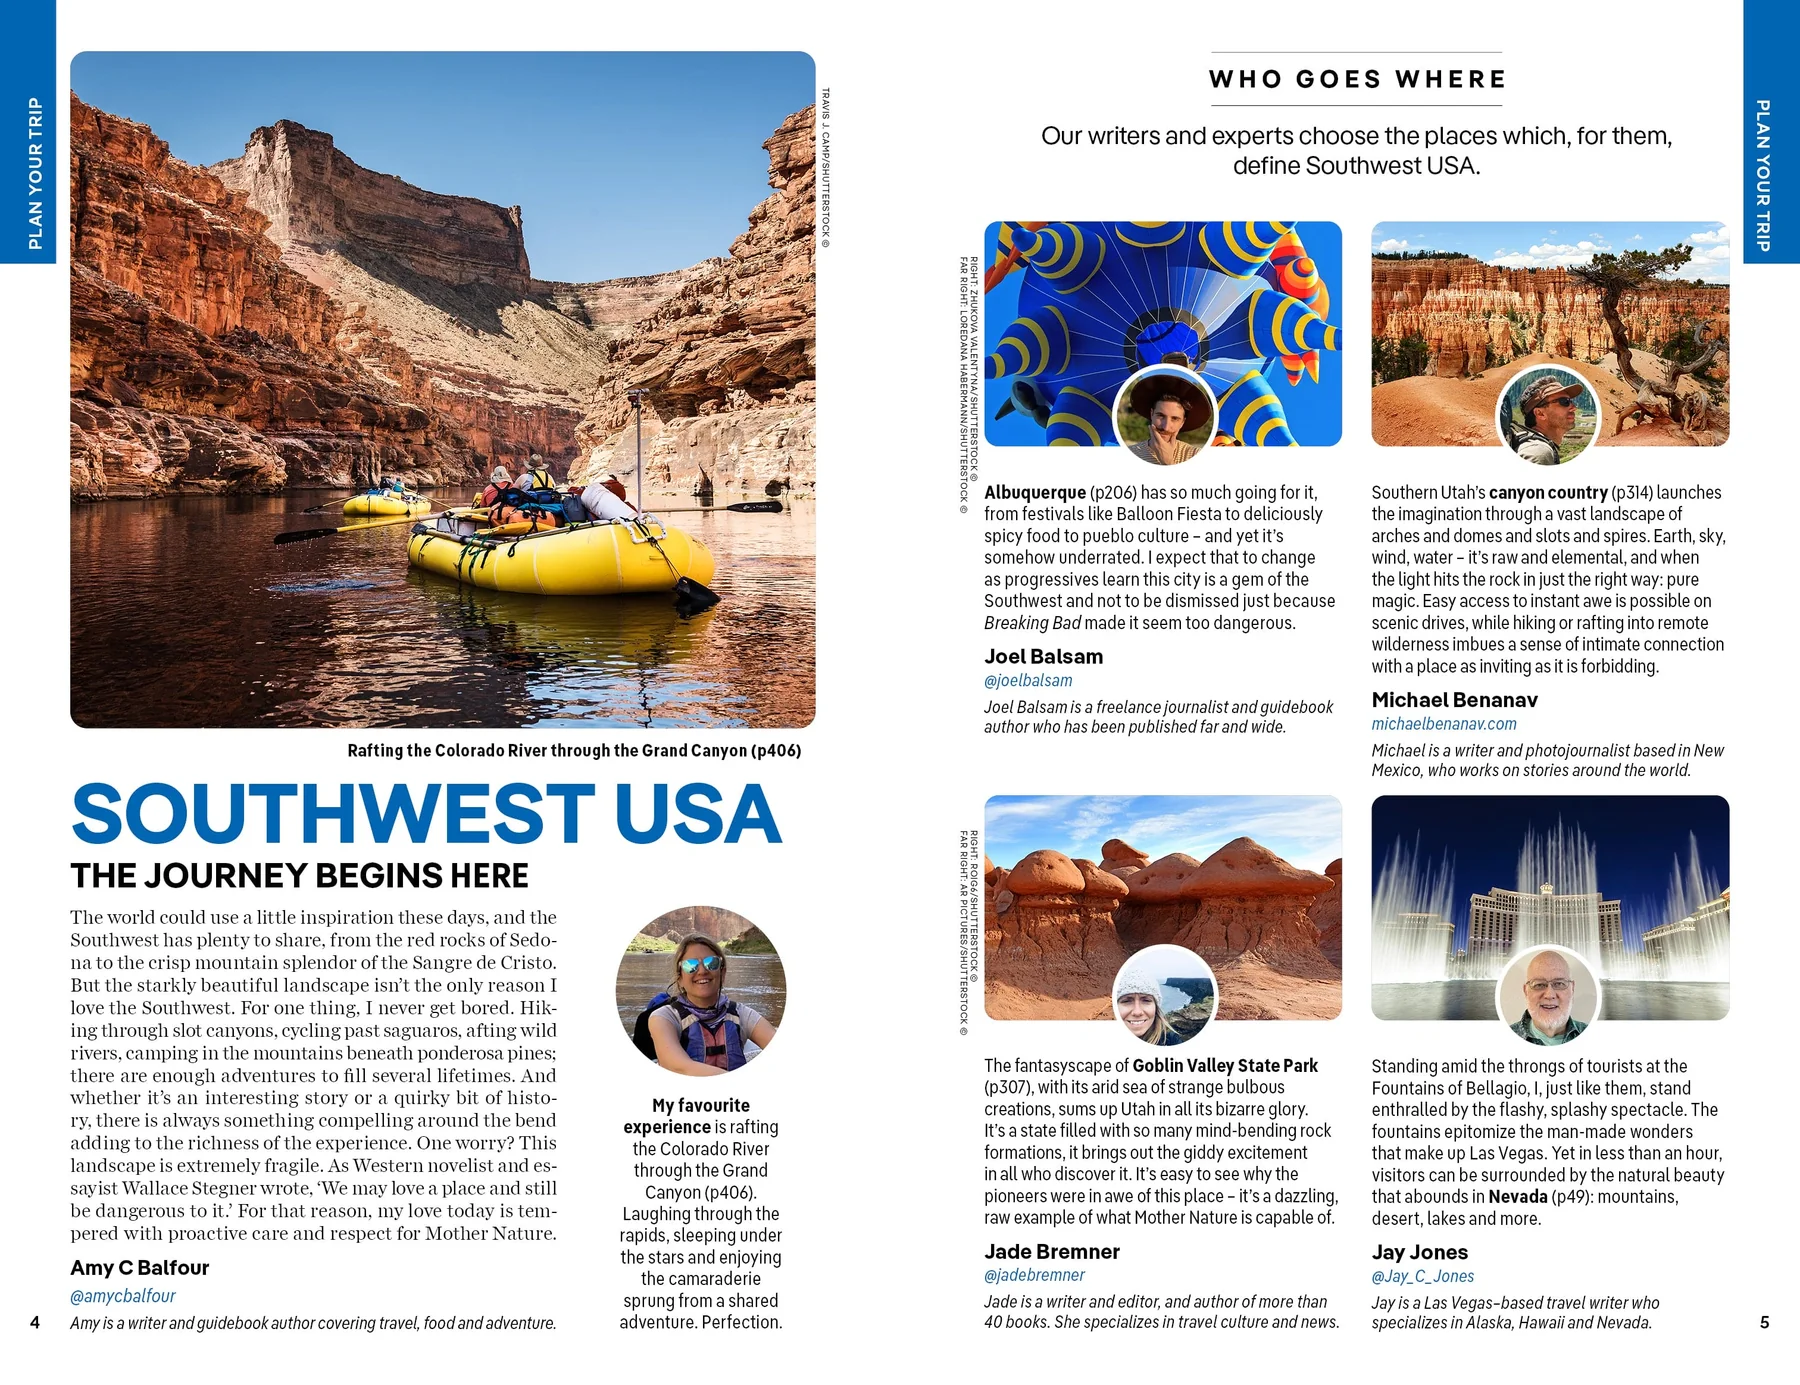 Southwest USA Lonely Planet